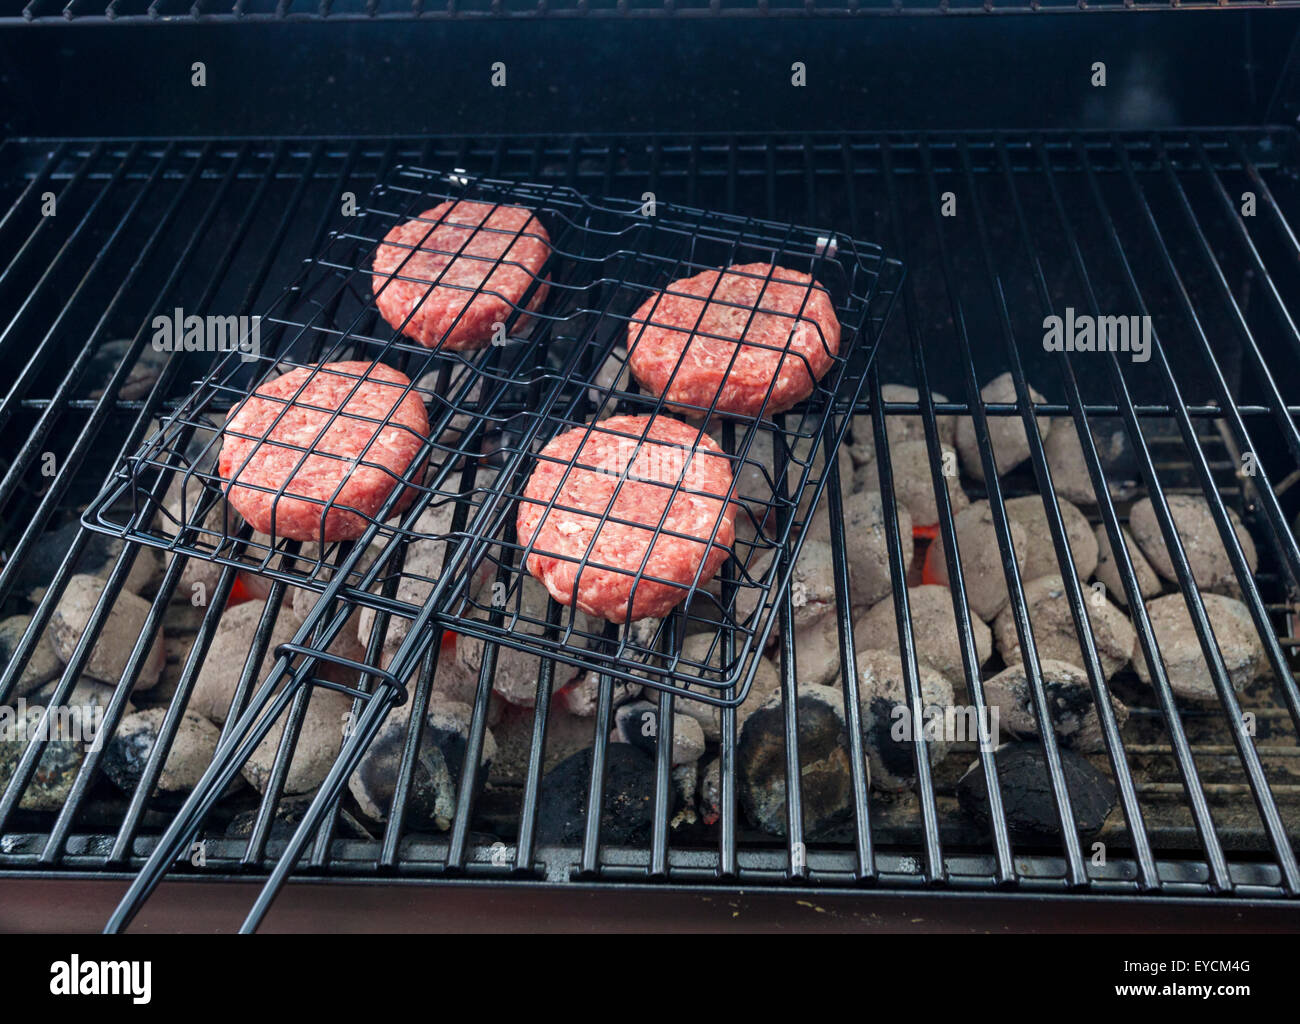 Charcoal BBQ. Burgers cooking on a barbecue Stock Photo